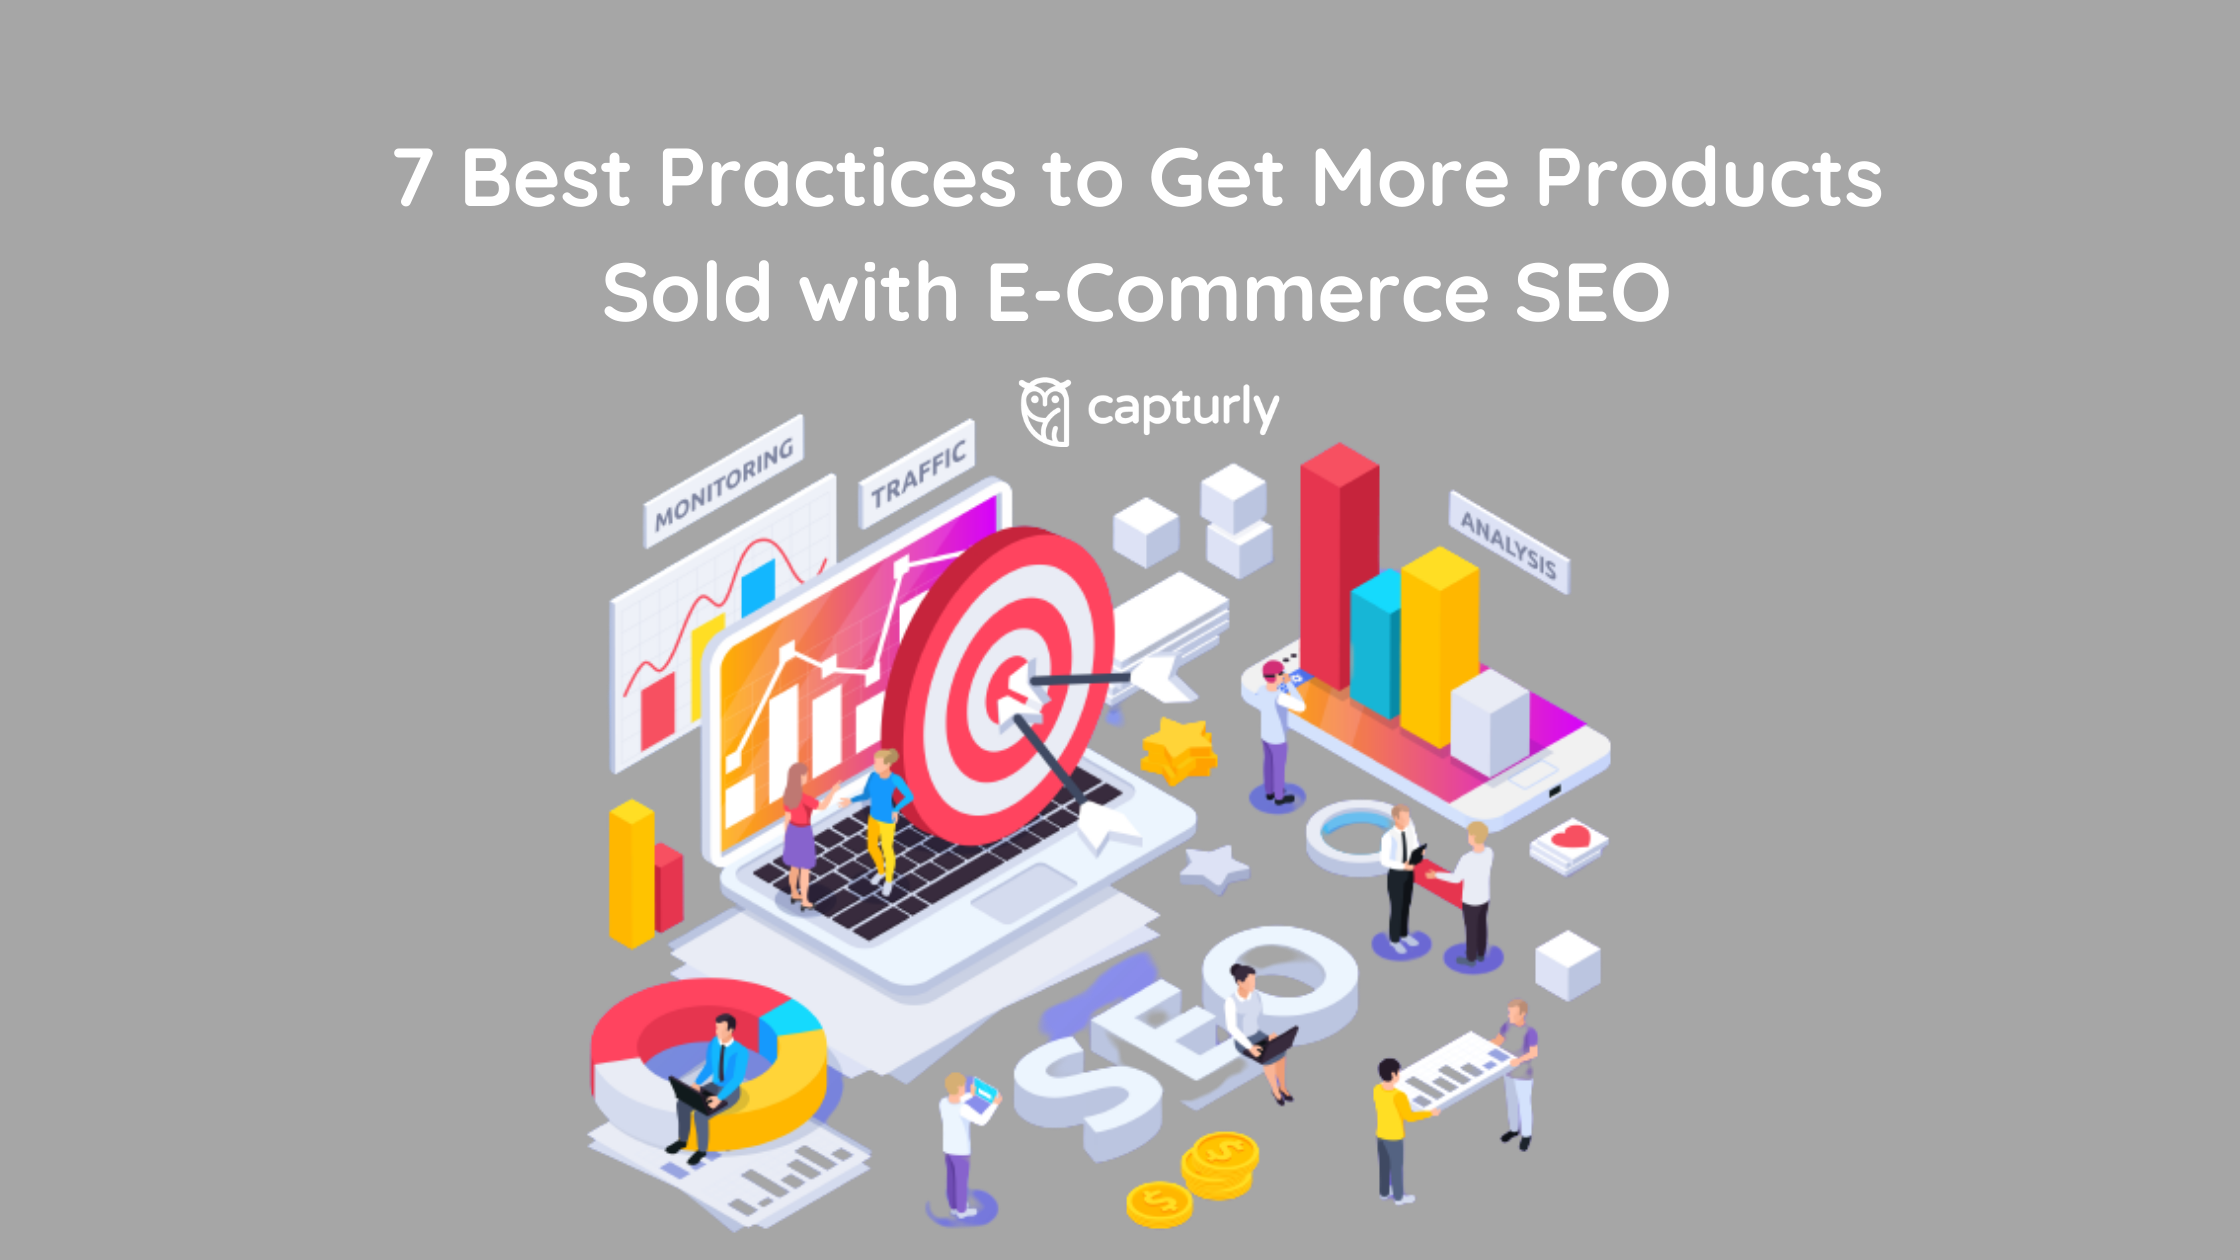 7 Best Practices to Get More Products Sold with E-Commerce SEO (1)